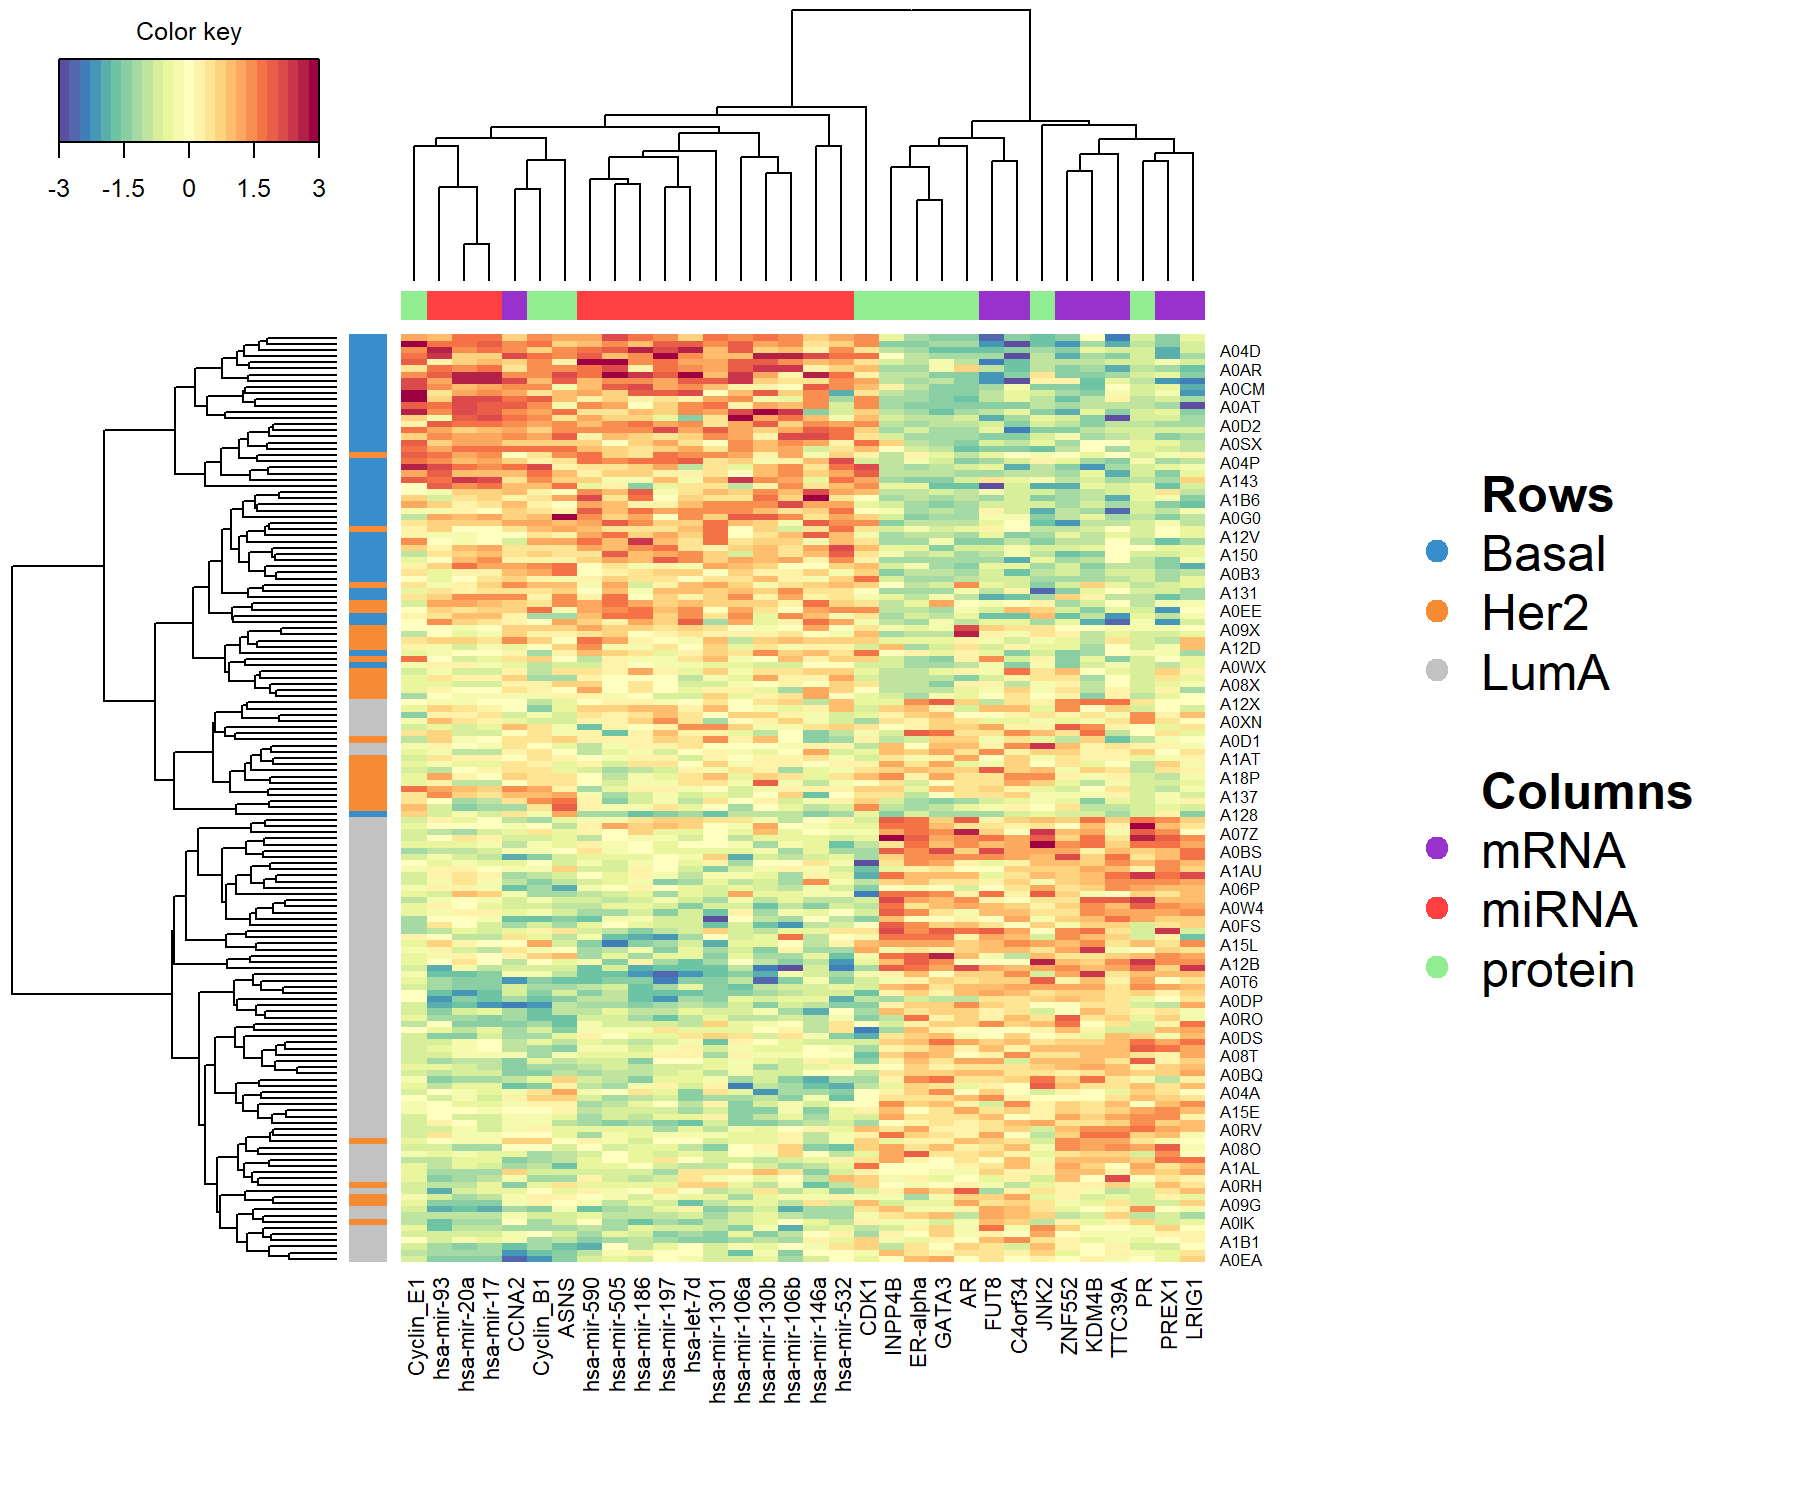 Clustered Image Map for the variables selected by multiblock sPLS-DA performed on the breast.TCGA study on component 1. By default, Euclidean distance and Complete linkage methods are used. The CIM represents samples in rows (indicated by their breast cancer subtype on the left hand side of the plot) and selected features in columns (indicated by their data type at the top of the plot).